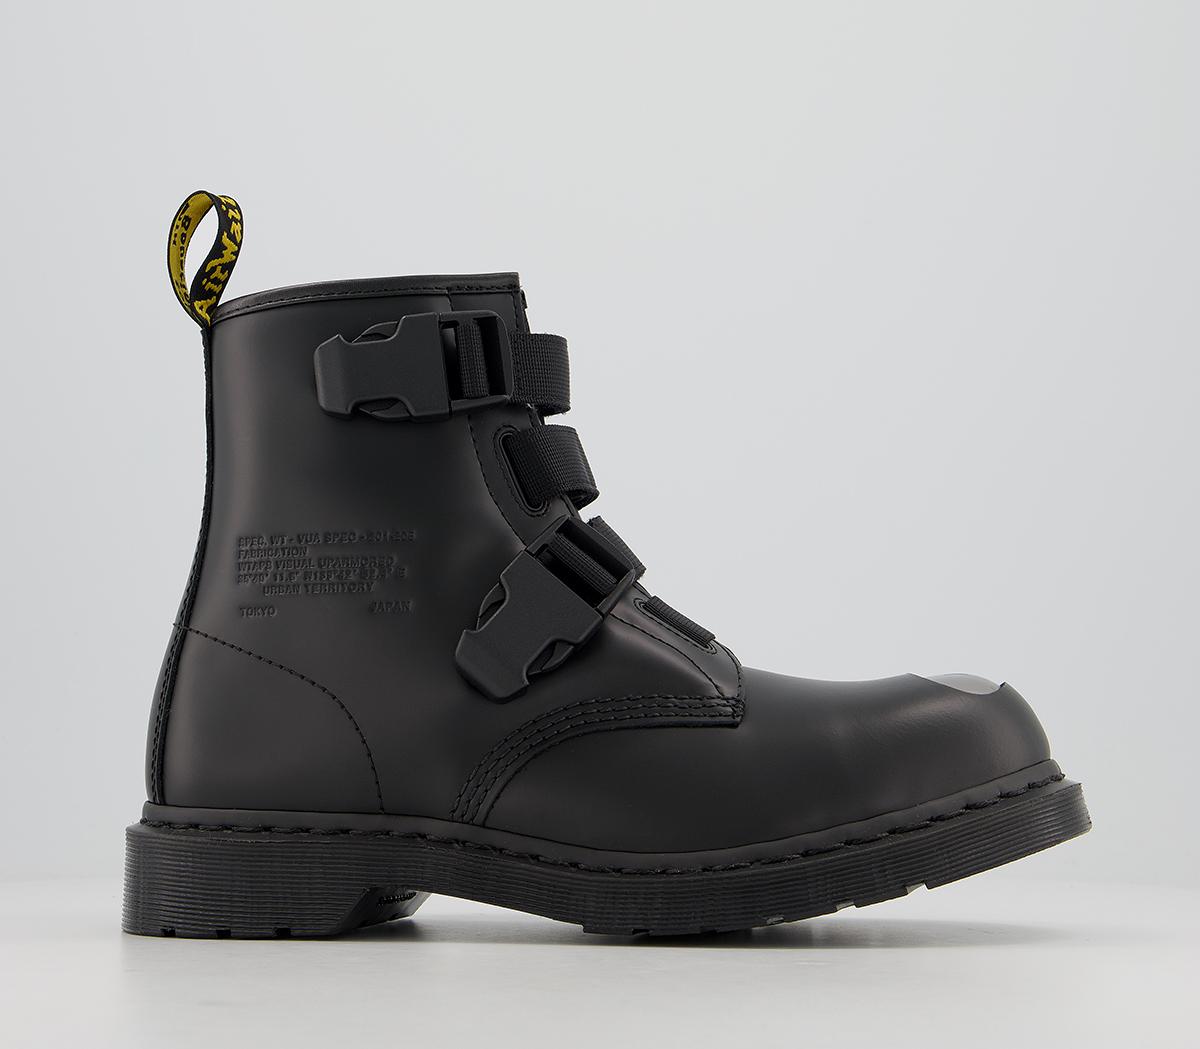 Dr. Martens 1460 WTAPS Leather Strap Boots Black Smooth - Men’s Boots